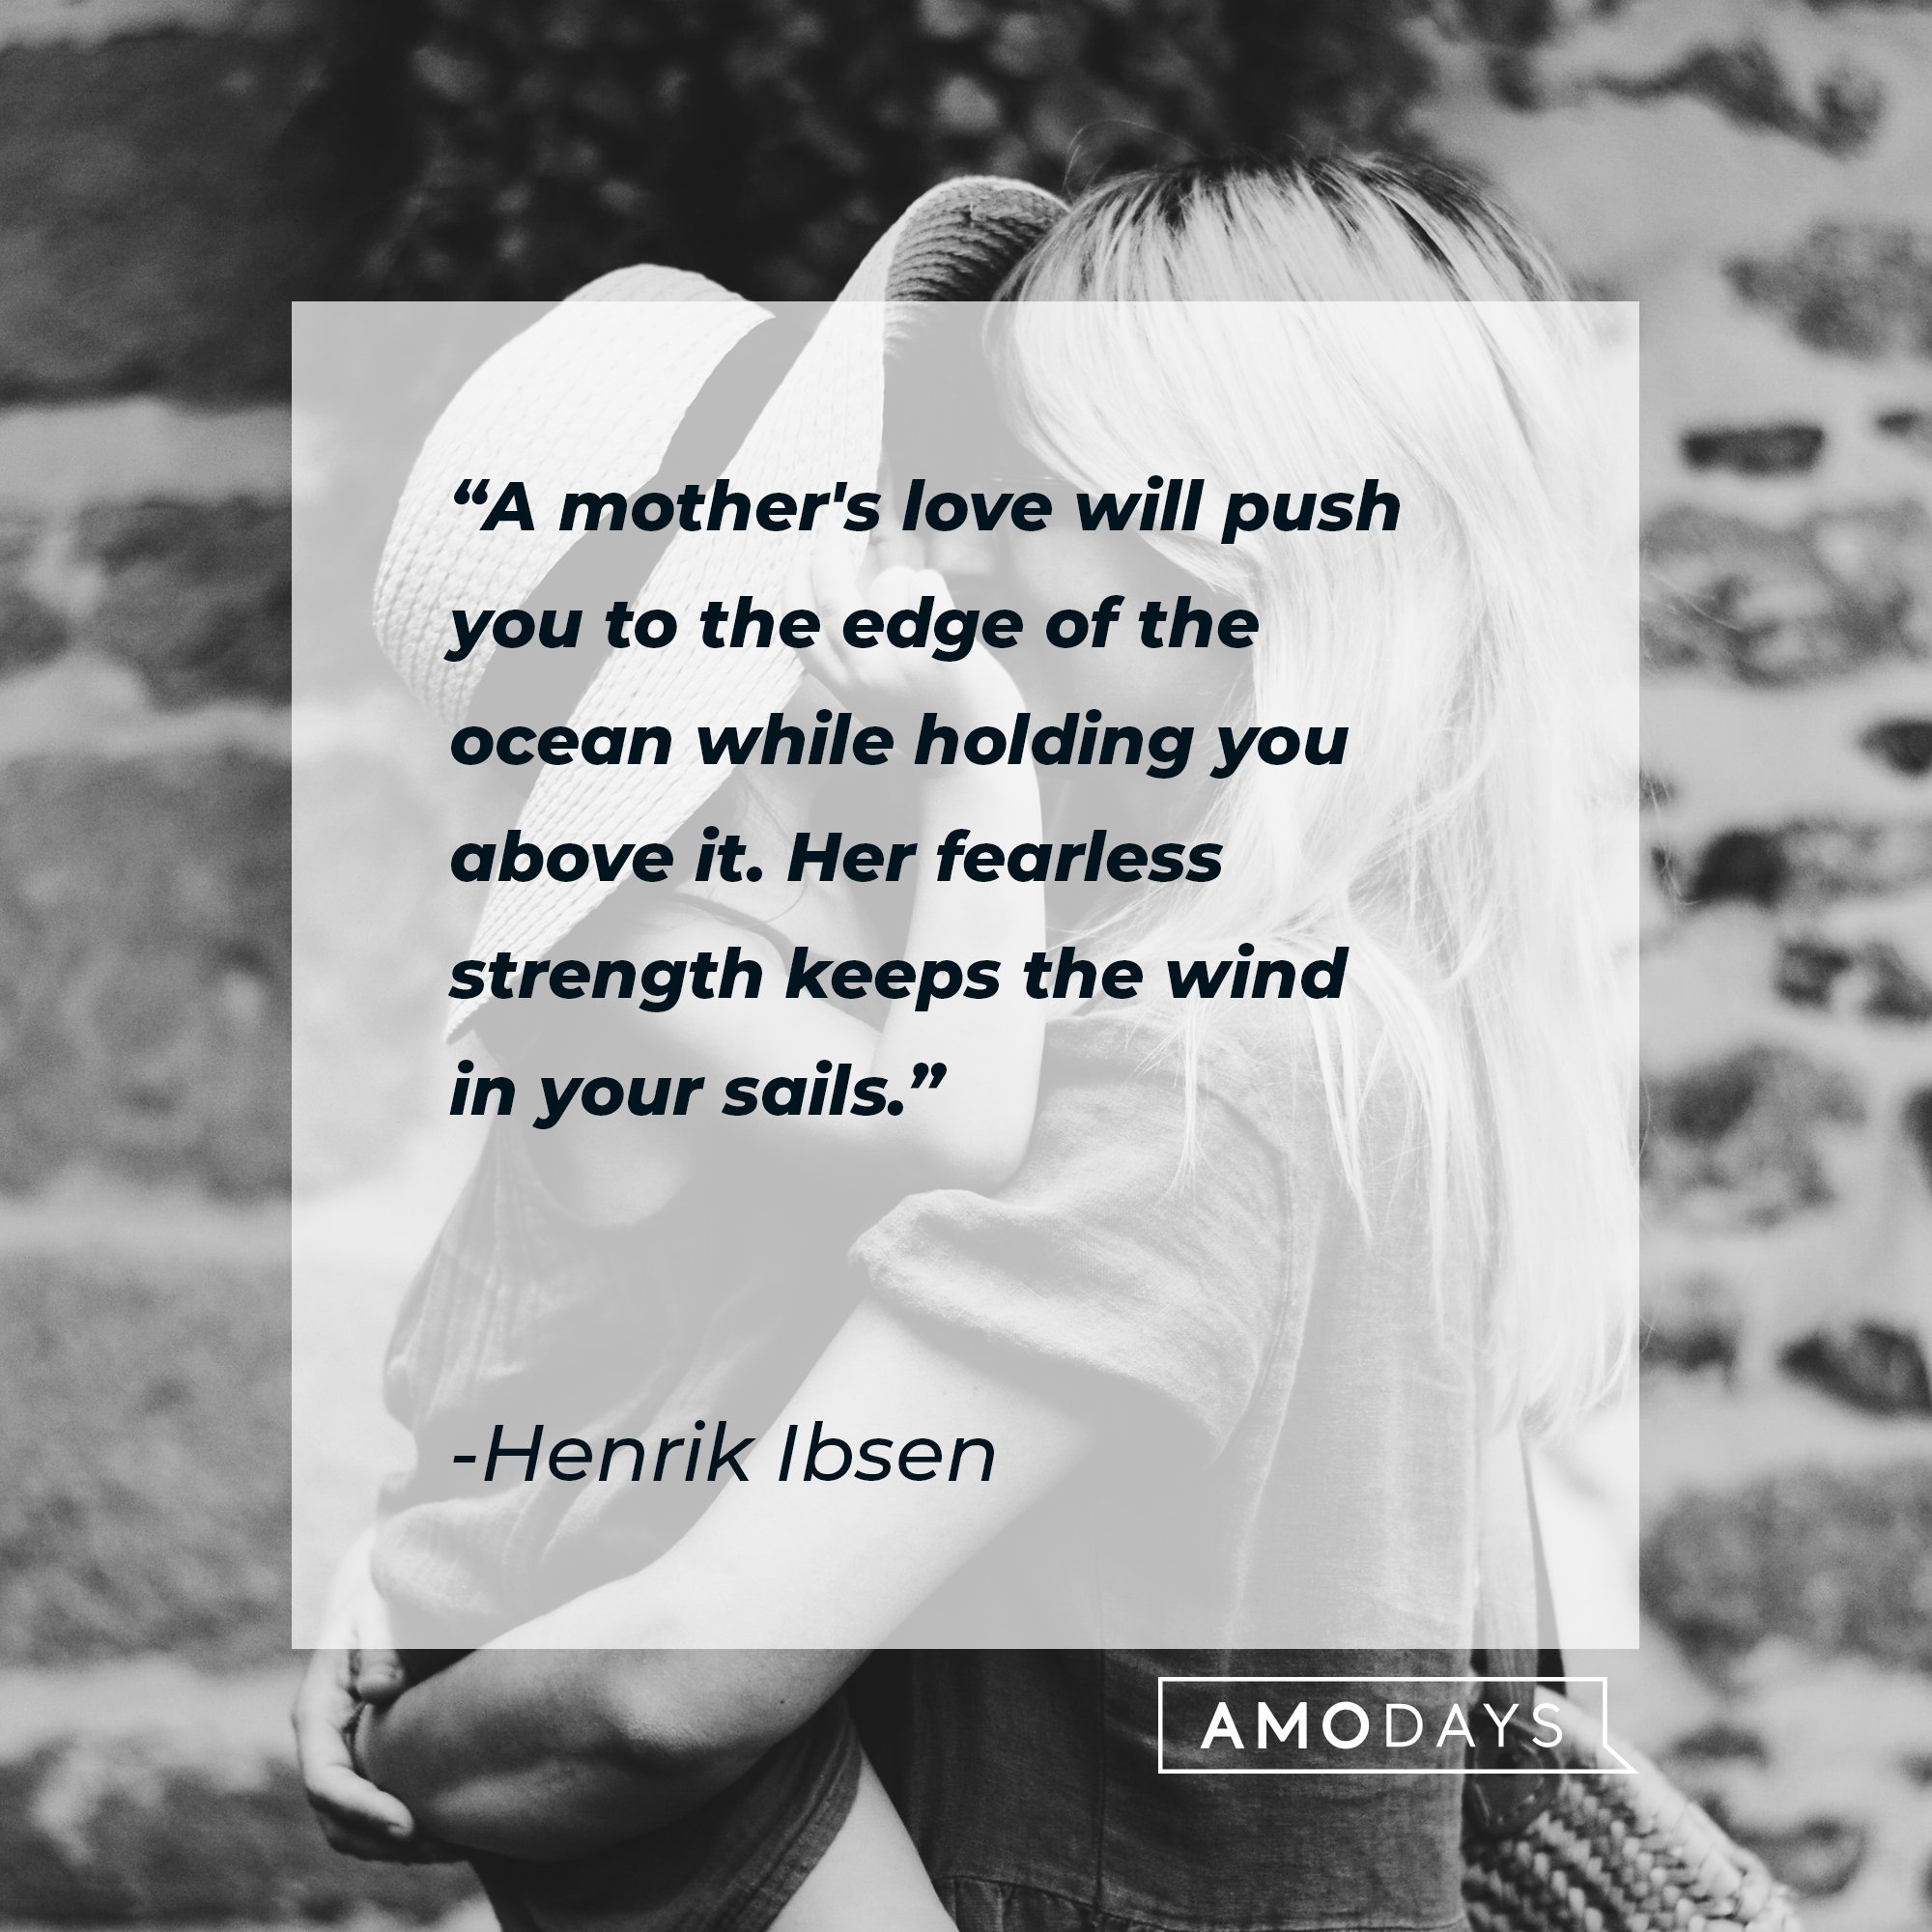 Henrik Ibsen's quote: "A mother's love will push you to the edge of the ocean while holding you above it. Her fearless strength keeps the wind in your sails." | Image: AmoDays